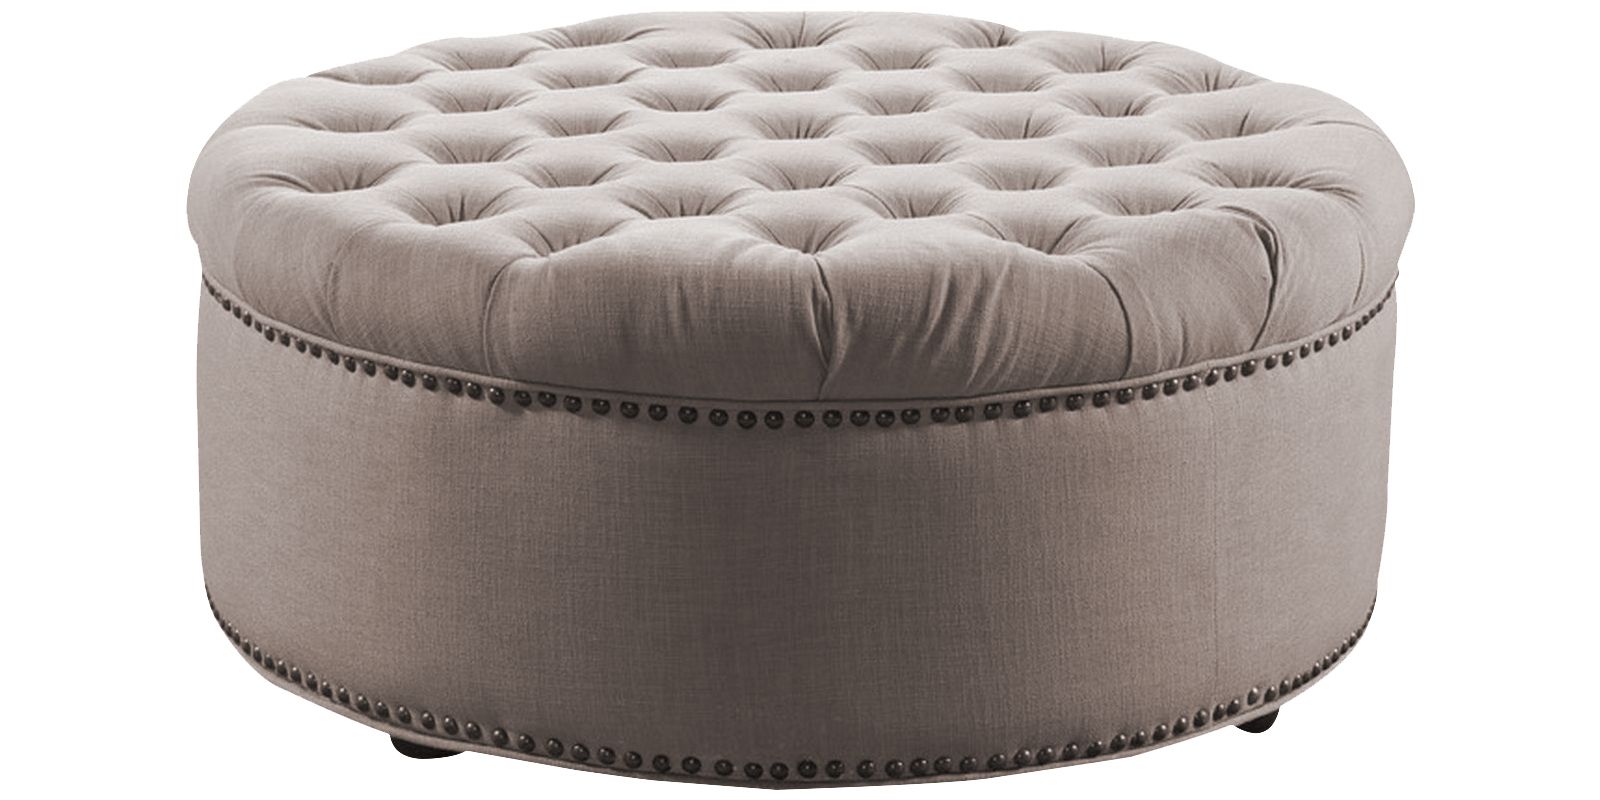 Most Recent Stylish Tufted Round Ottoman In Beige Colour (View 3 of 10)